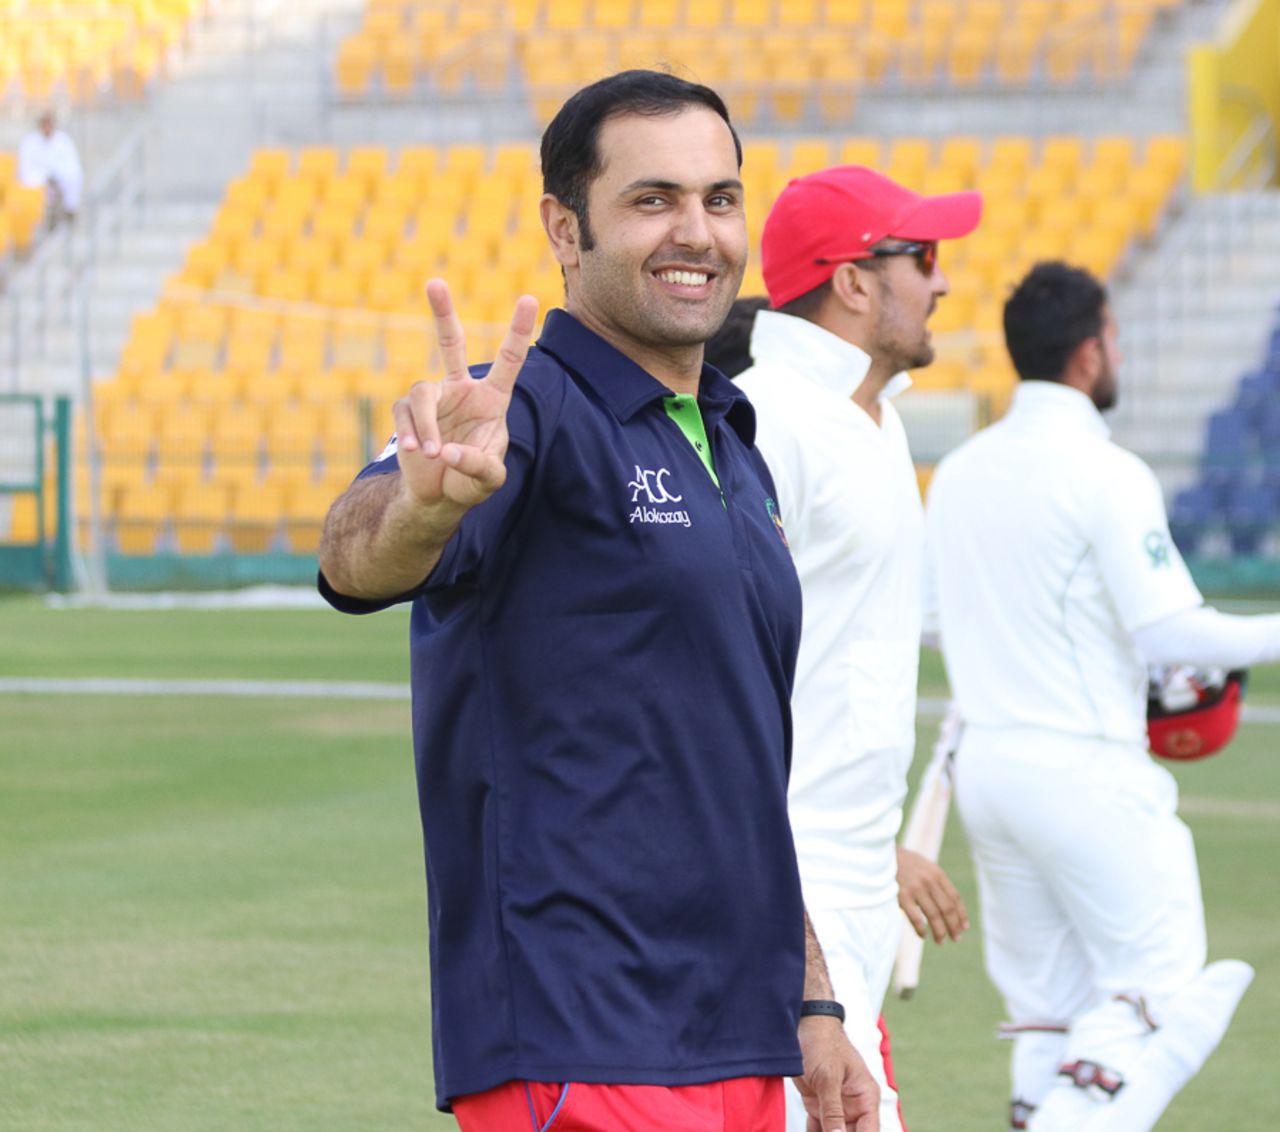 Mohammad Nabi is all smiles after winning the Intercontinental Cup for the second time, UAE v Afghanistan, 2015-17 Intercontinental Cup, 4th day, Abu Dhabi, December 2, 2017